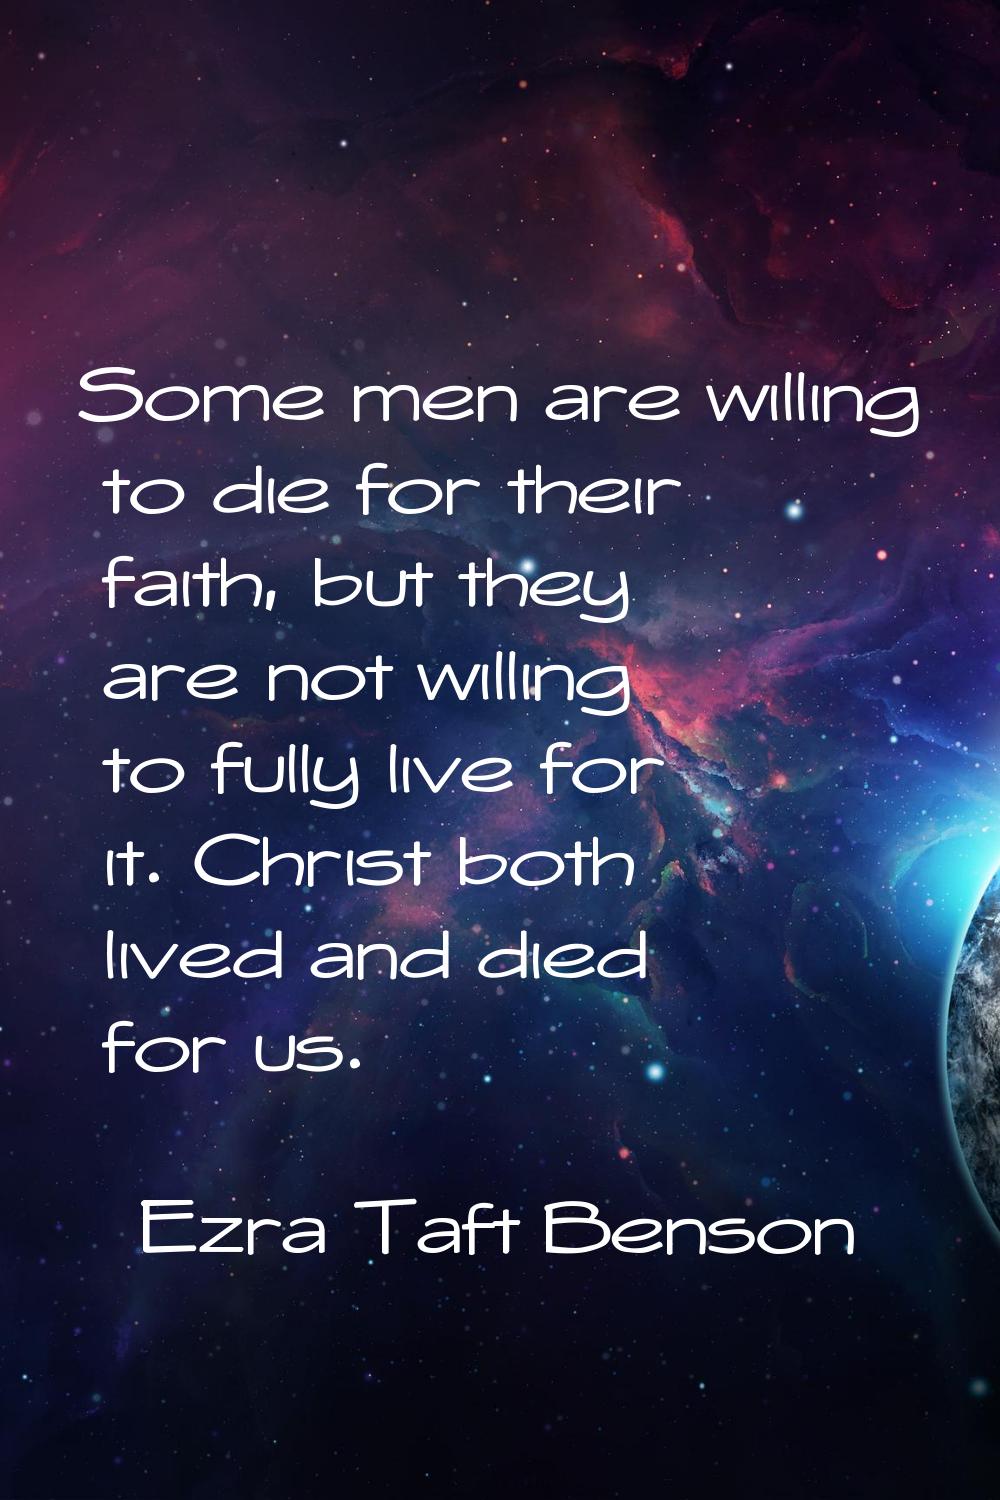 Some men are willing to die for their faith, but they are not willing to fully live for it. Christ 